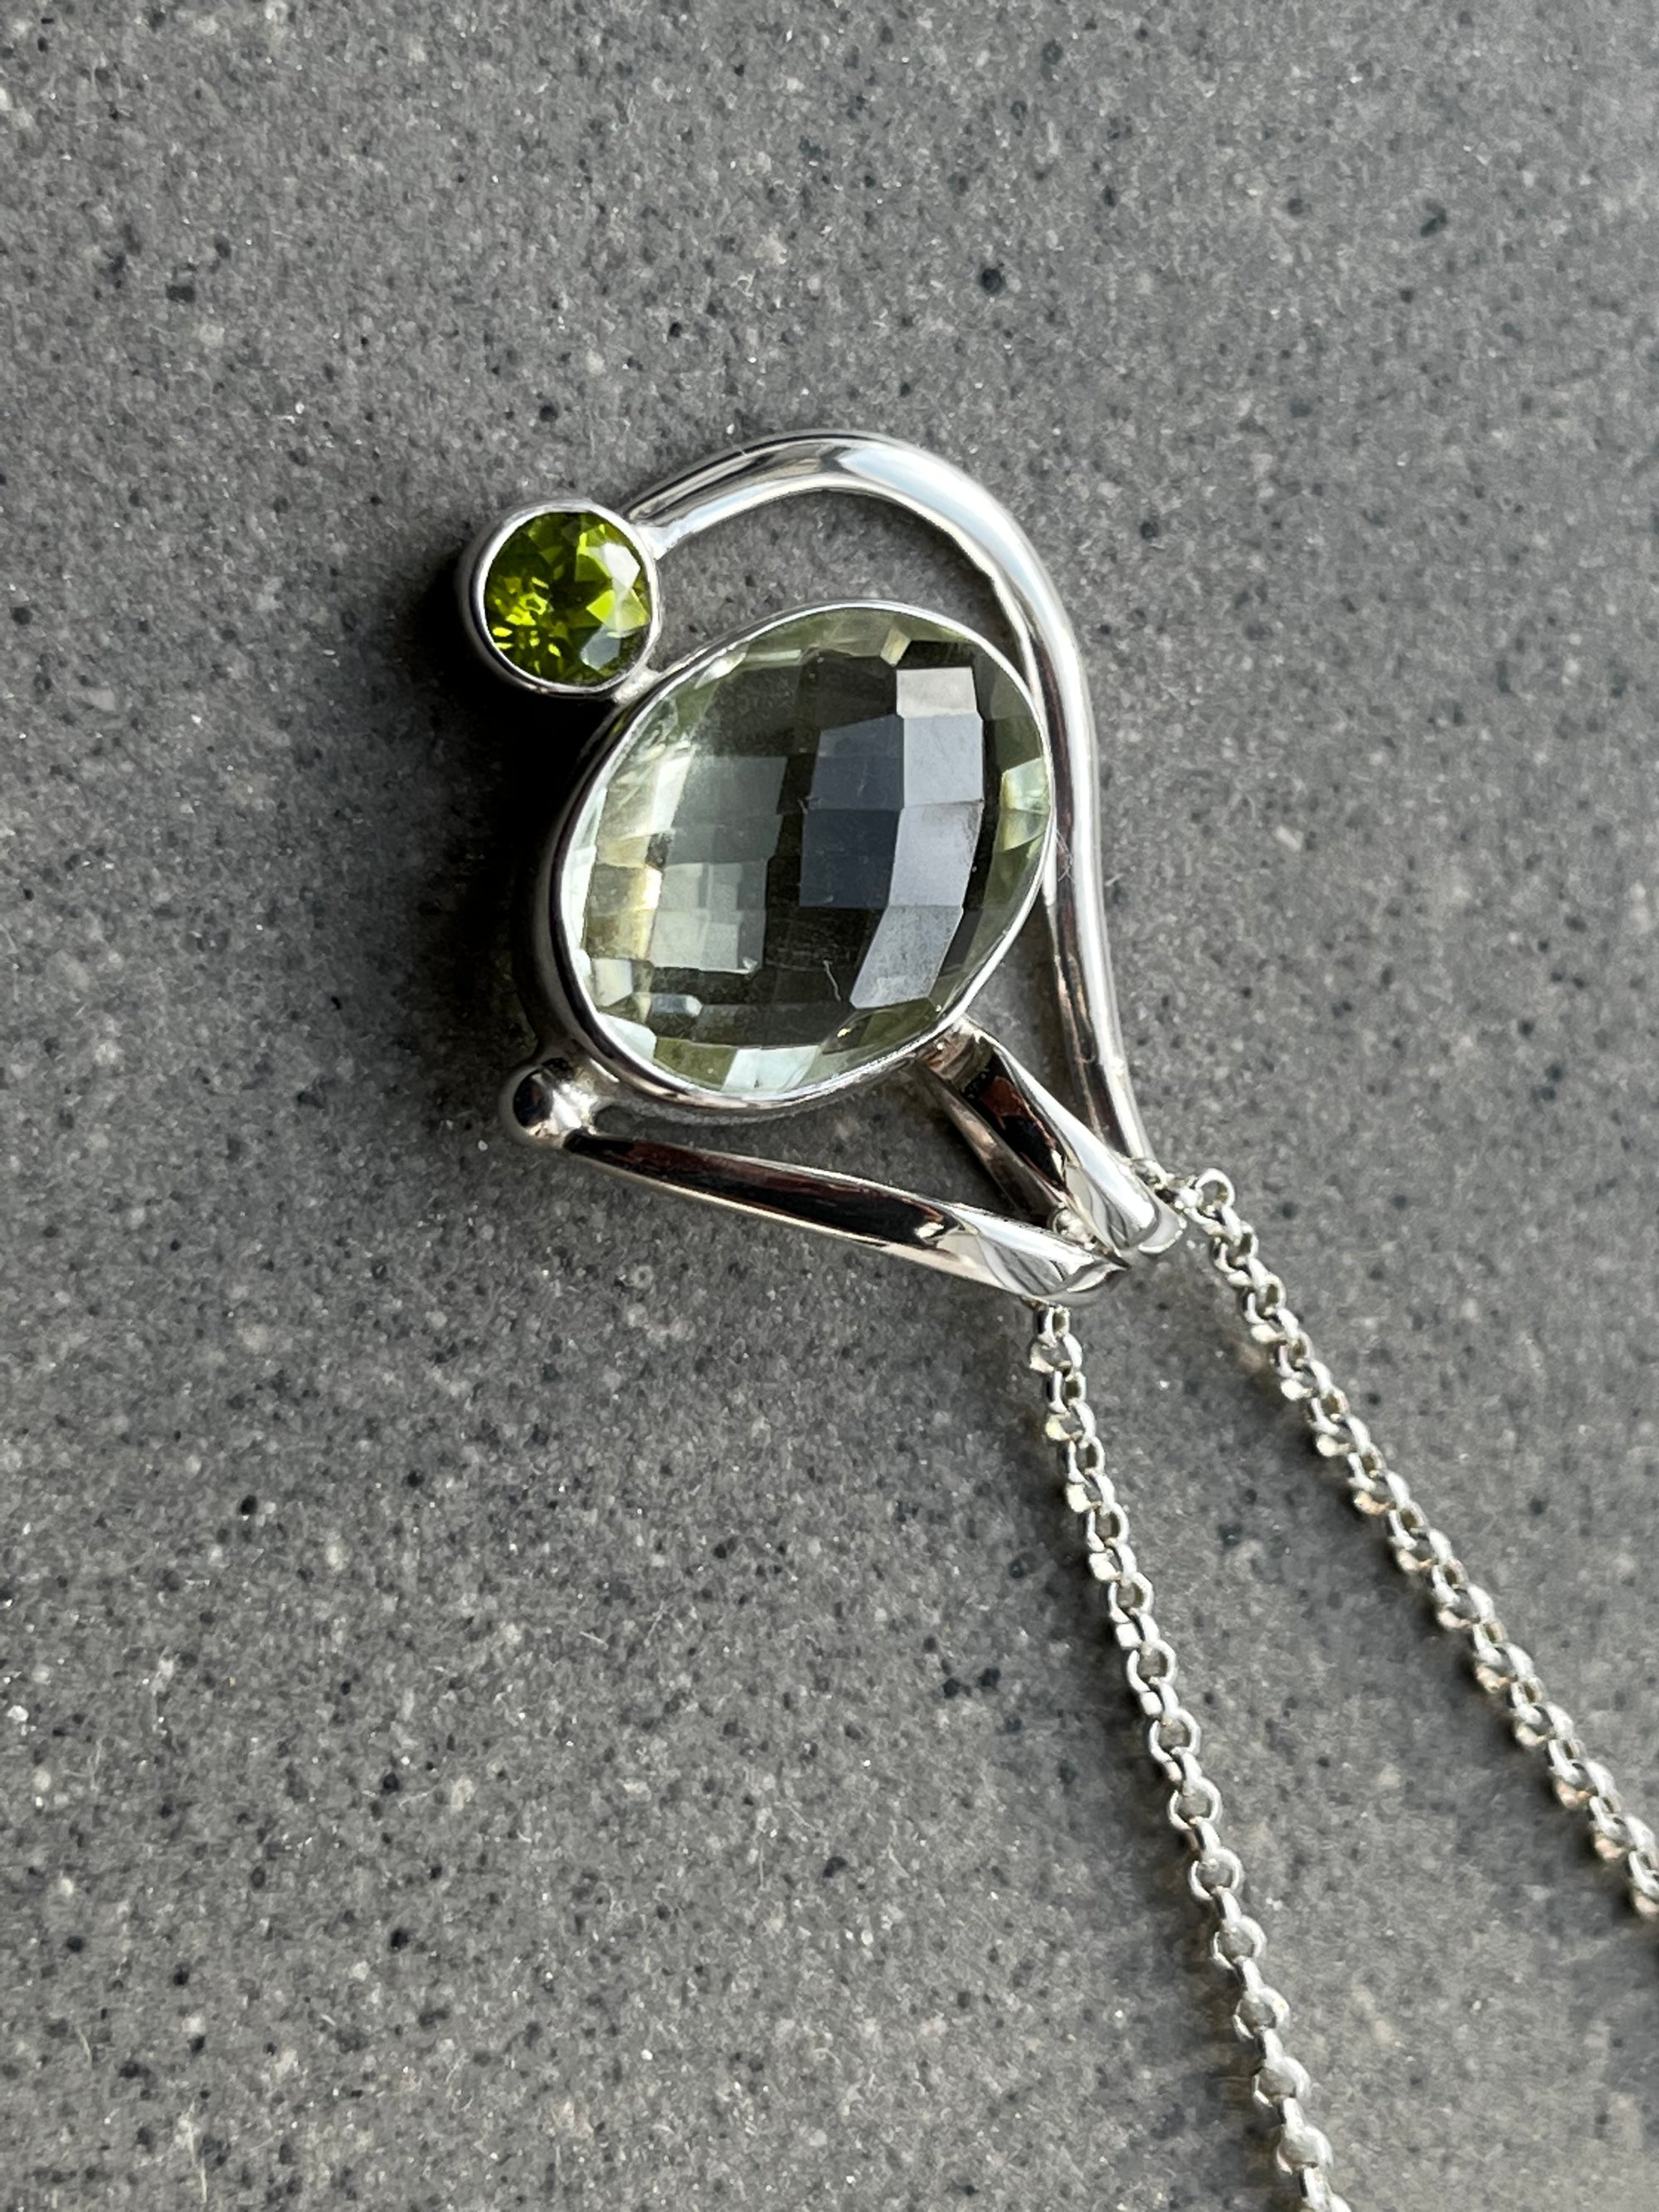 Green Amethyst and Peridot Morion Silver Pendant Necklace